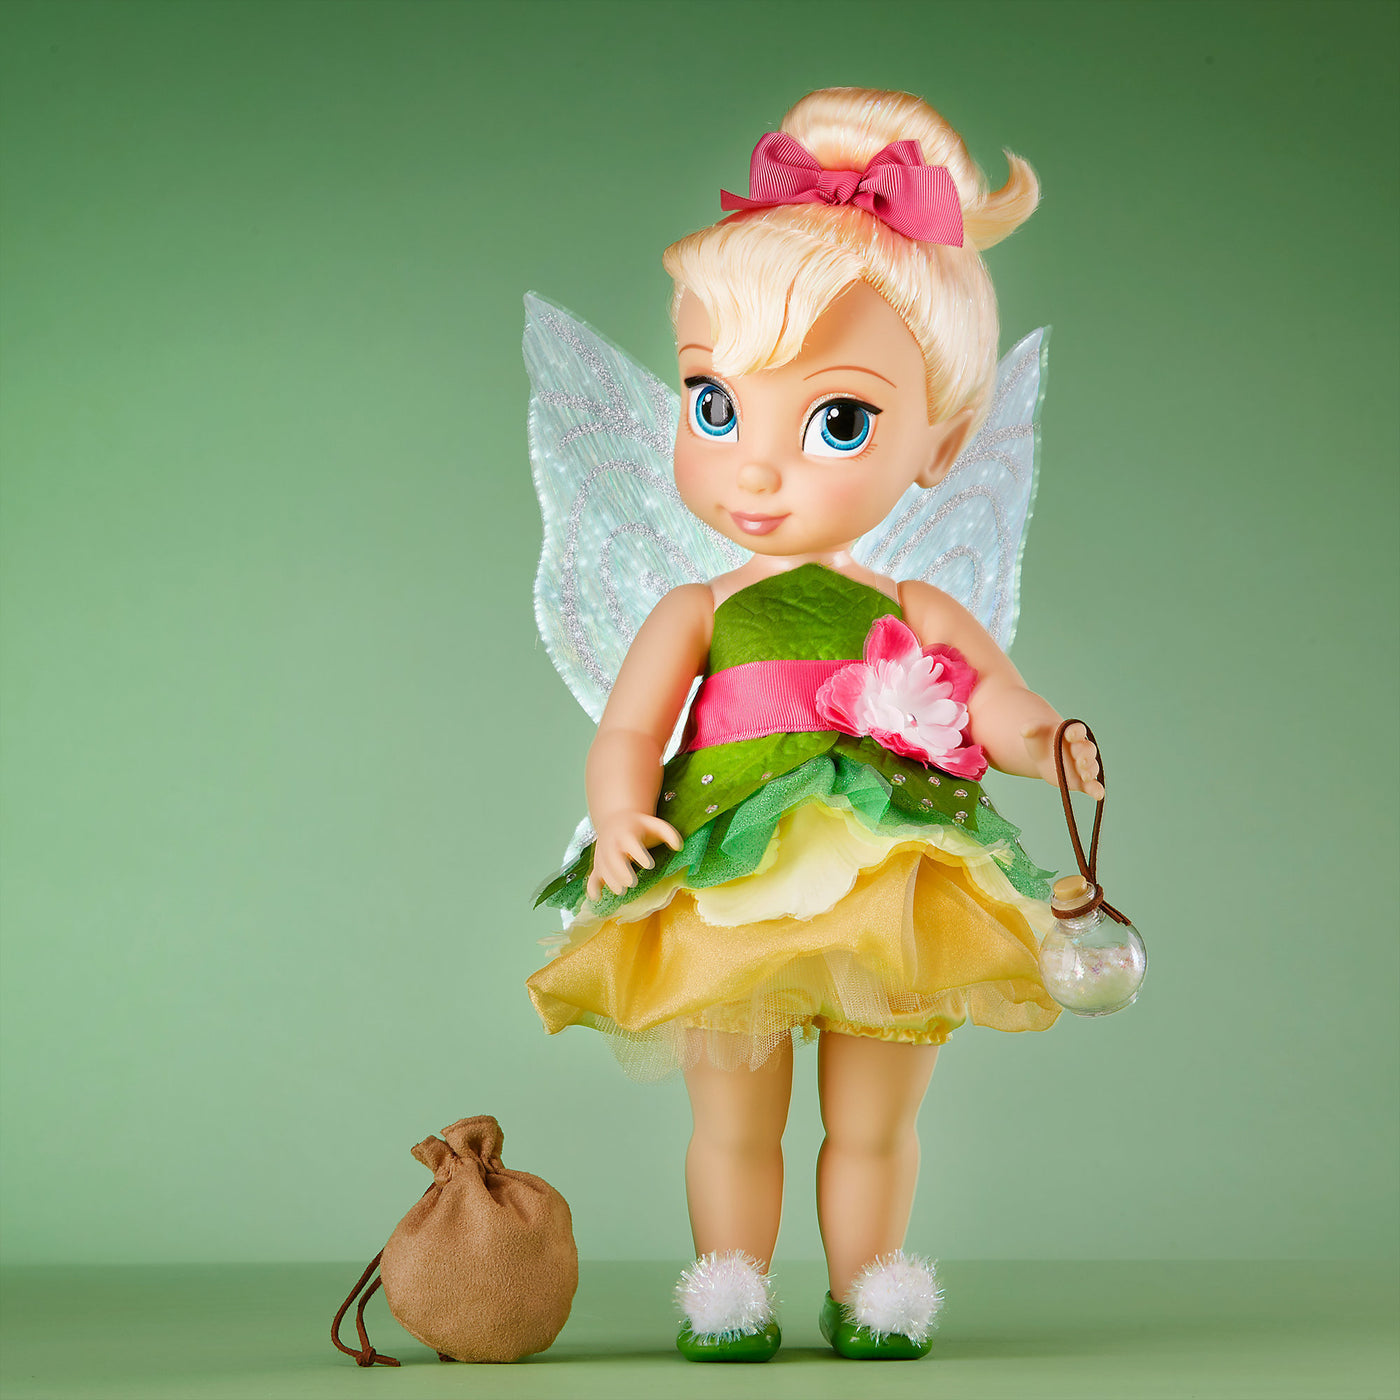 Disney Store Animators' Collection Tinker Bell Doll Special Edition New